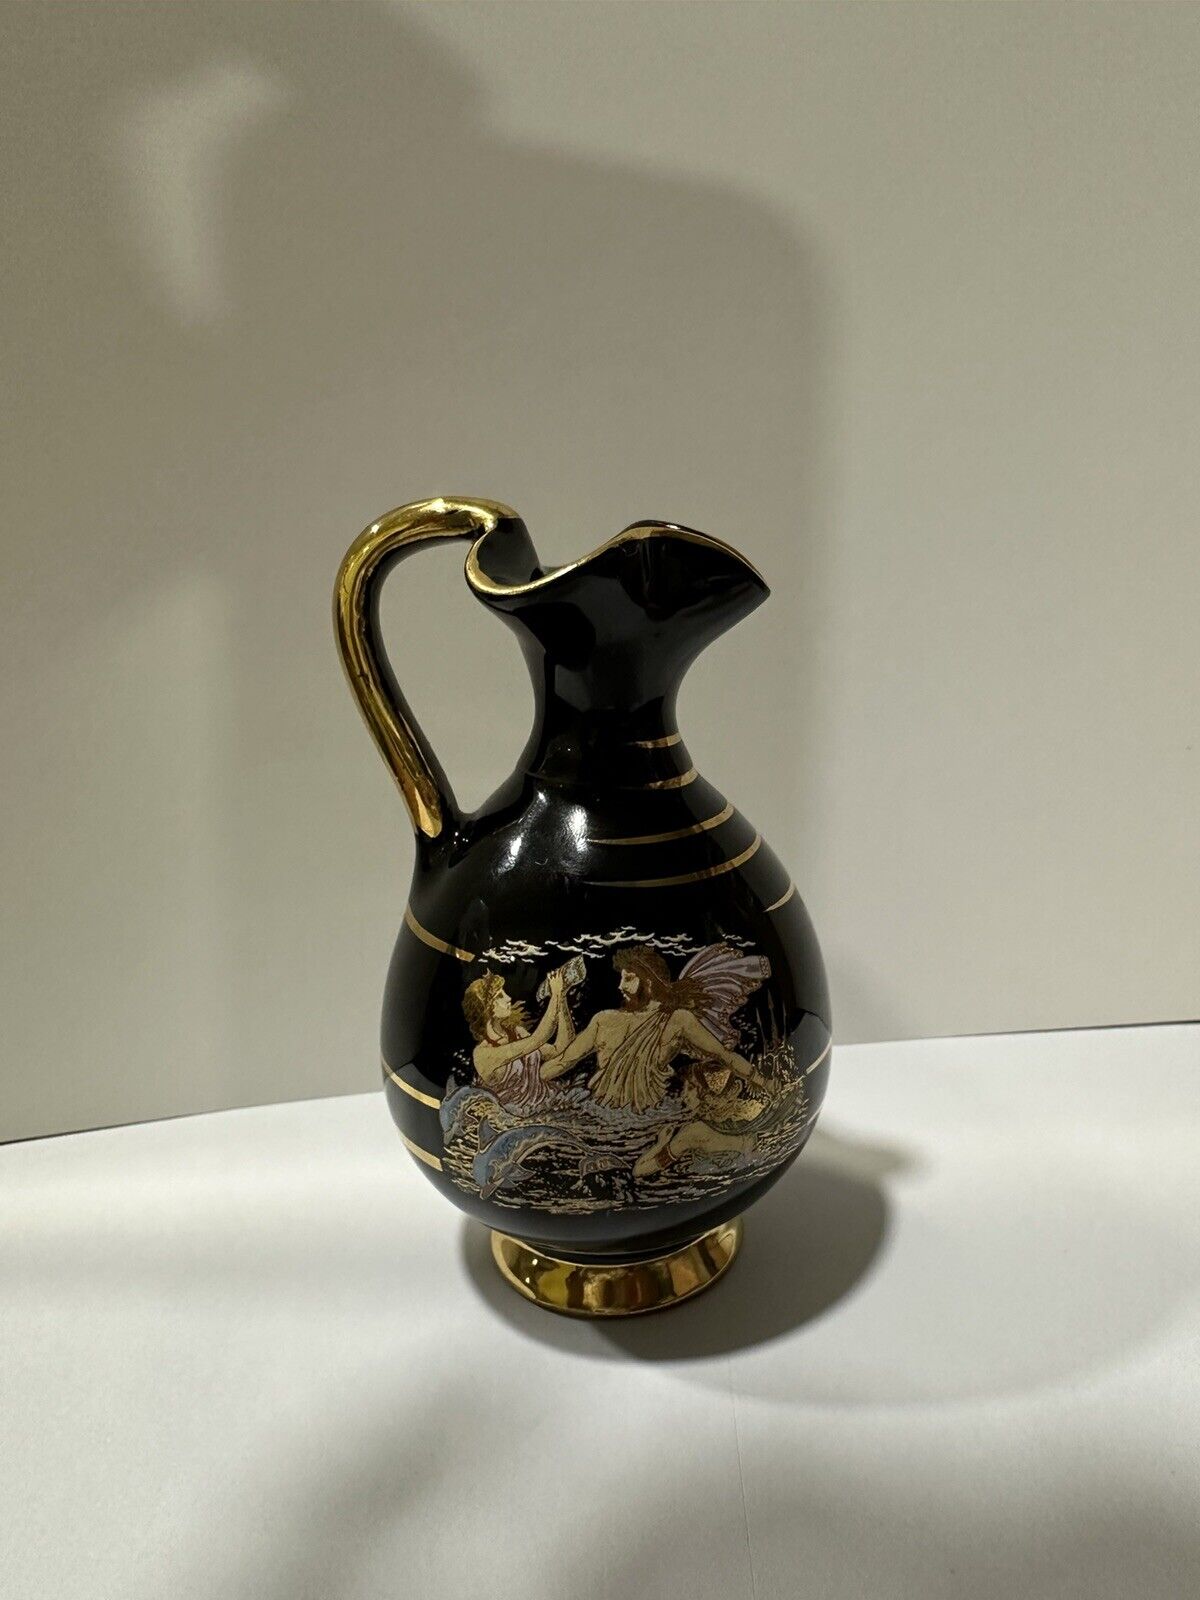 Beautiful Greek  Small  Vase 3.5” Handmade in Greece with 24k Gold  rare